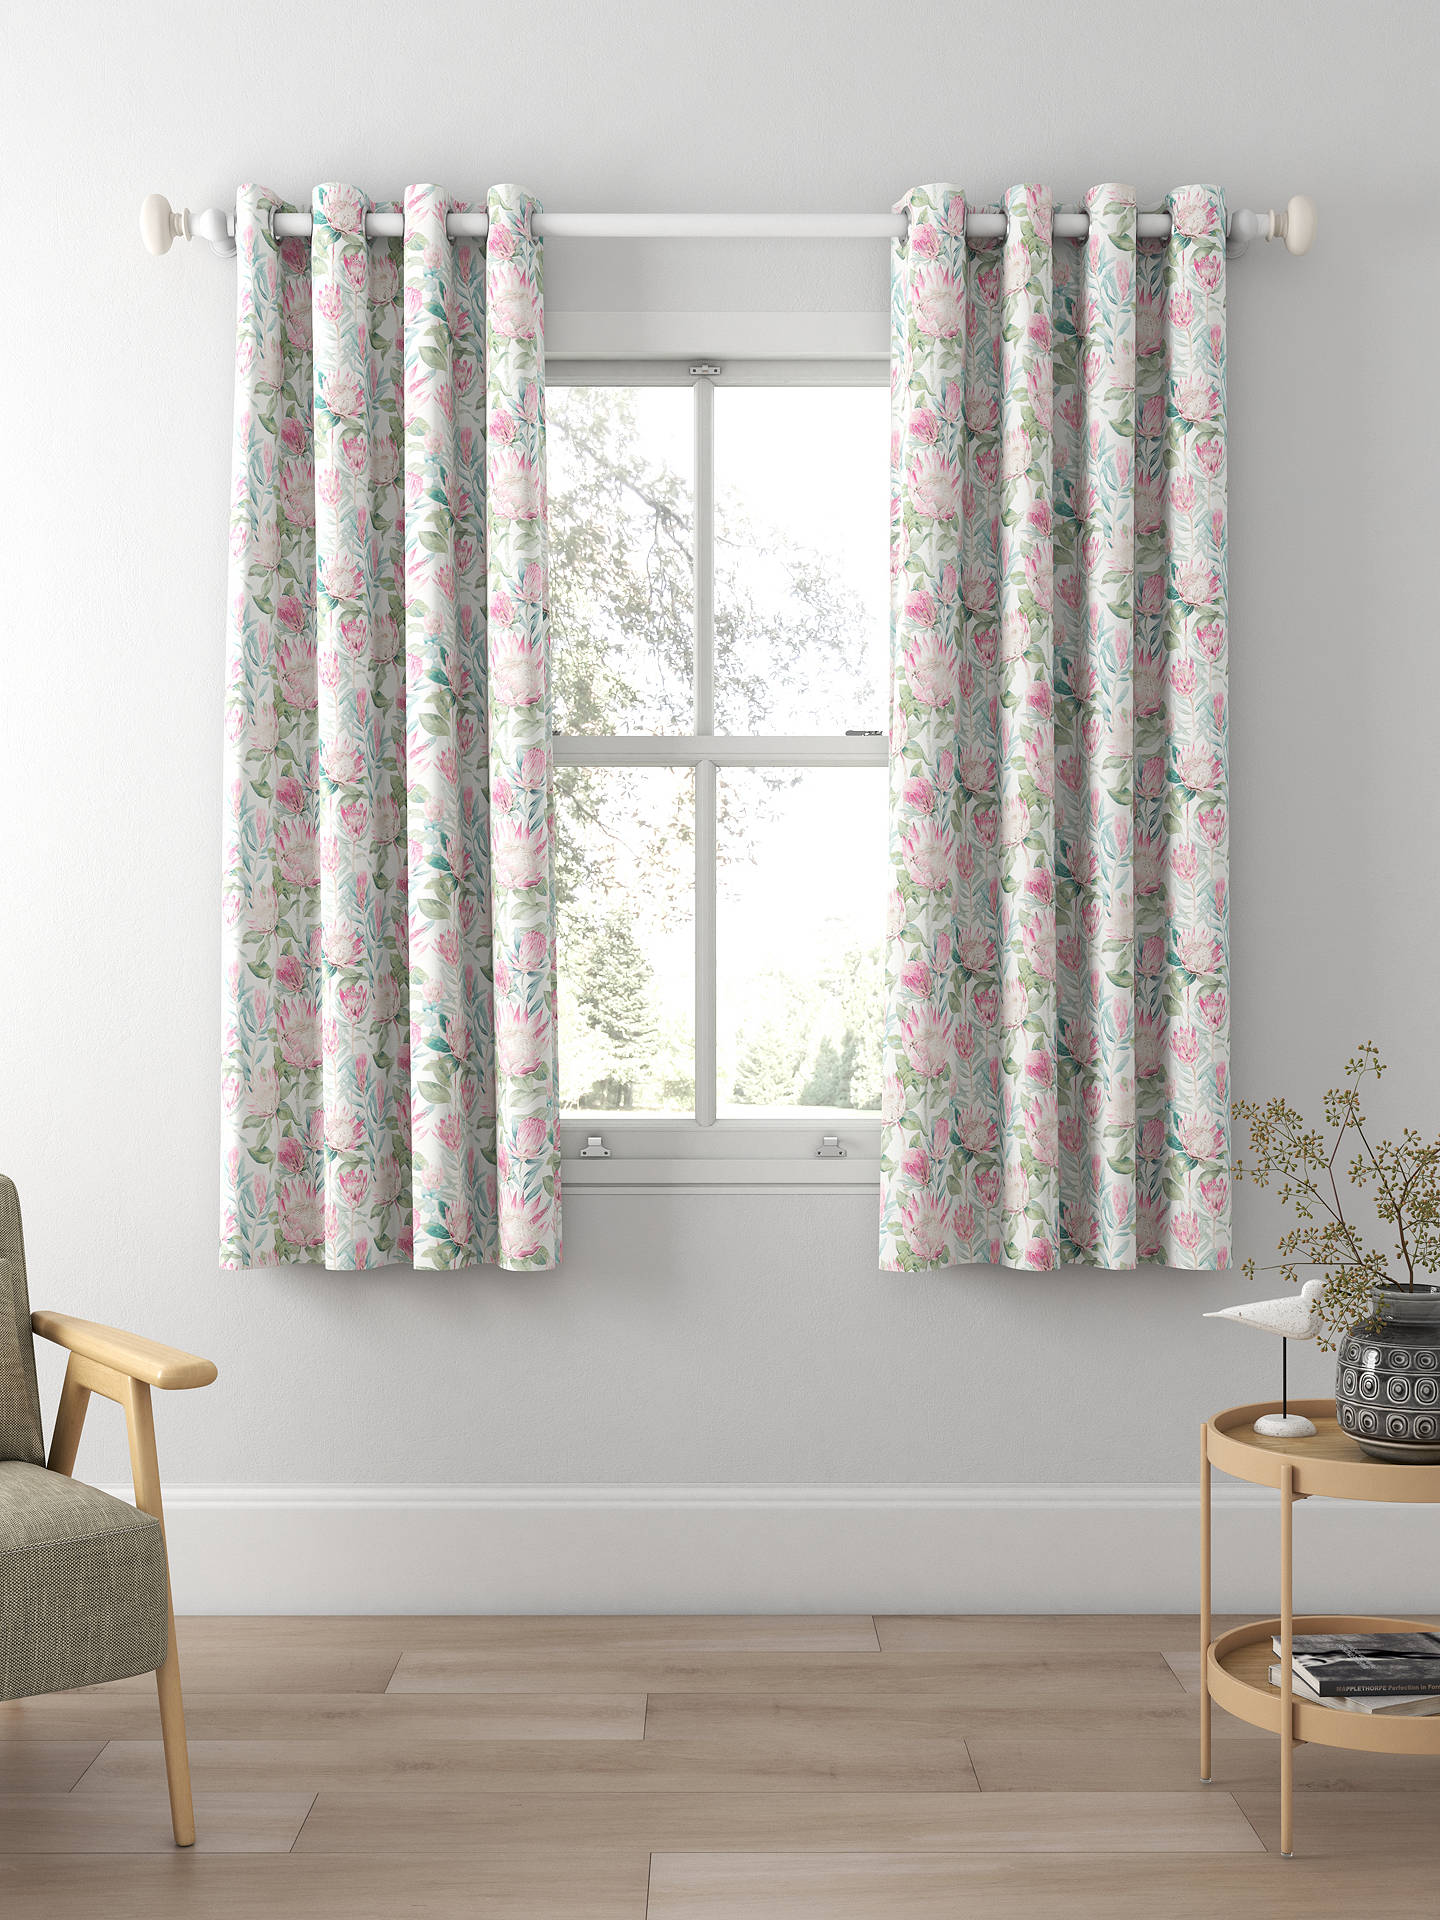 Sanderson King Protea Made to Measure Curtains, Orchid